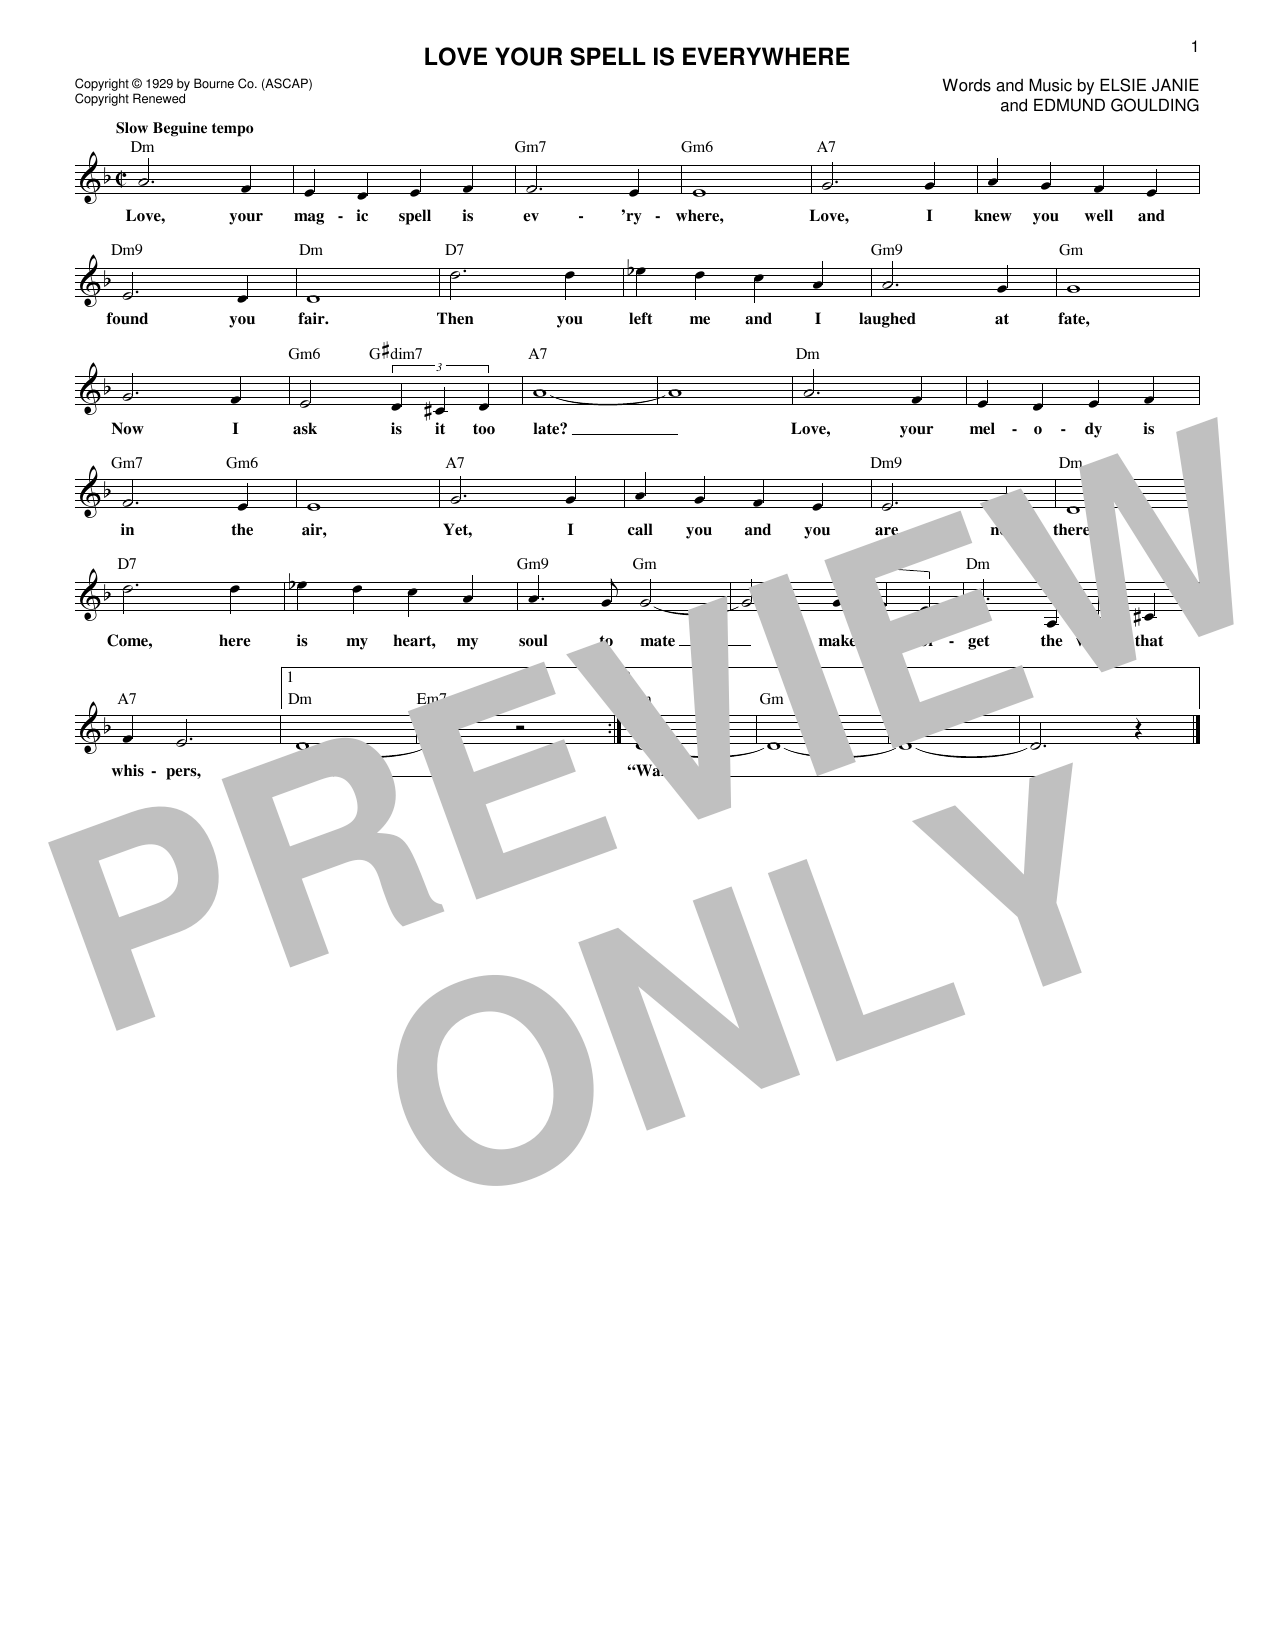 Elsie Janie "Love Your Spell Is Everywhere" Sheet Music PDF Notes